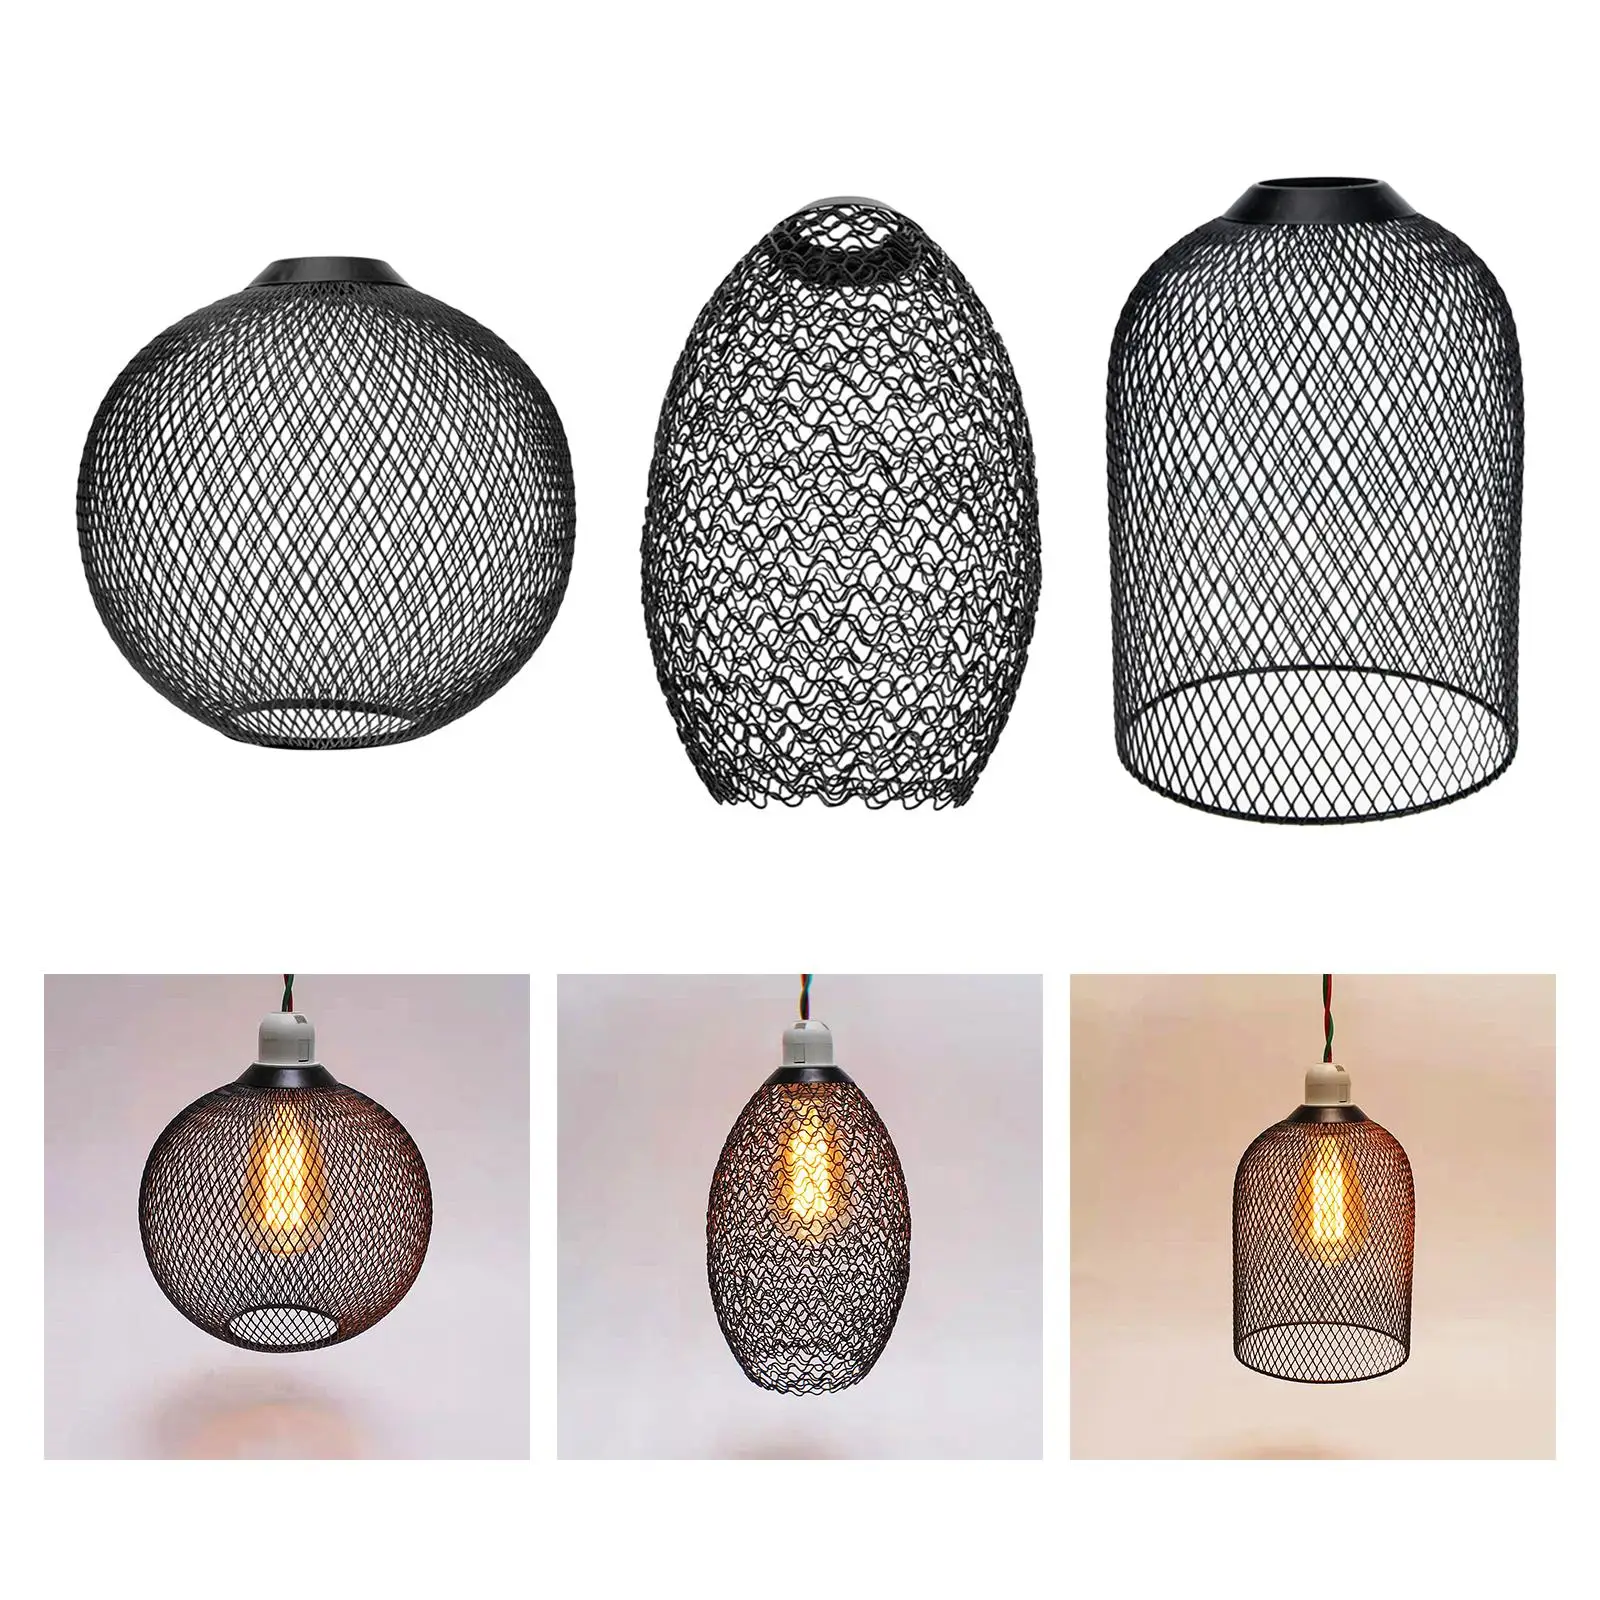 Metal Pendant Lamp Shade Chandelier Wrought Iron Wire Lampshade for Kitchen Island, Cafe